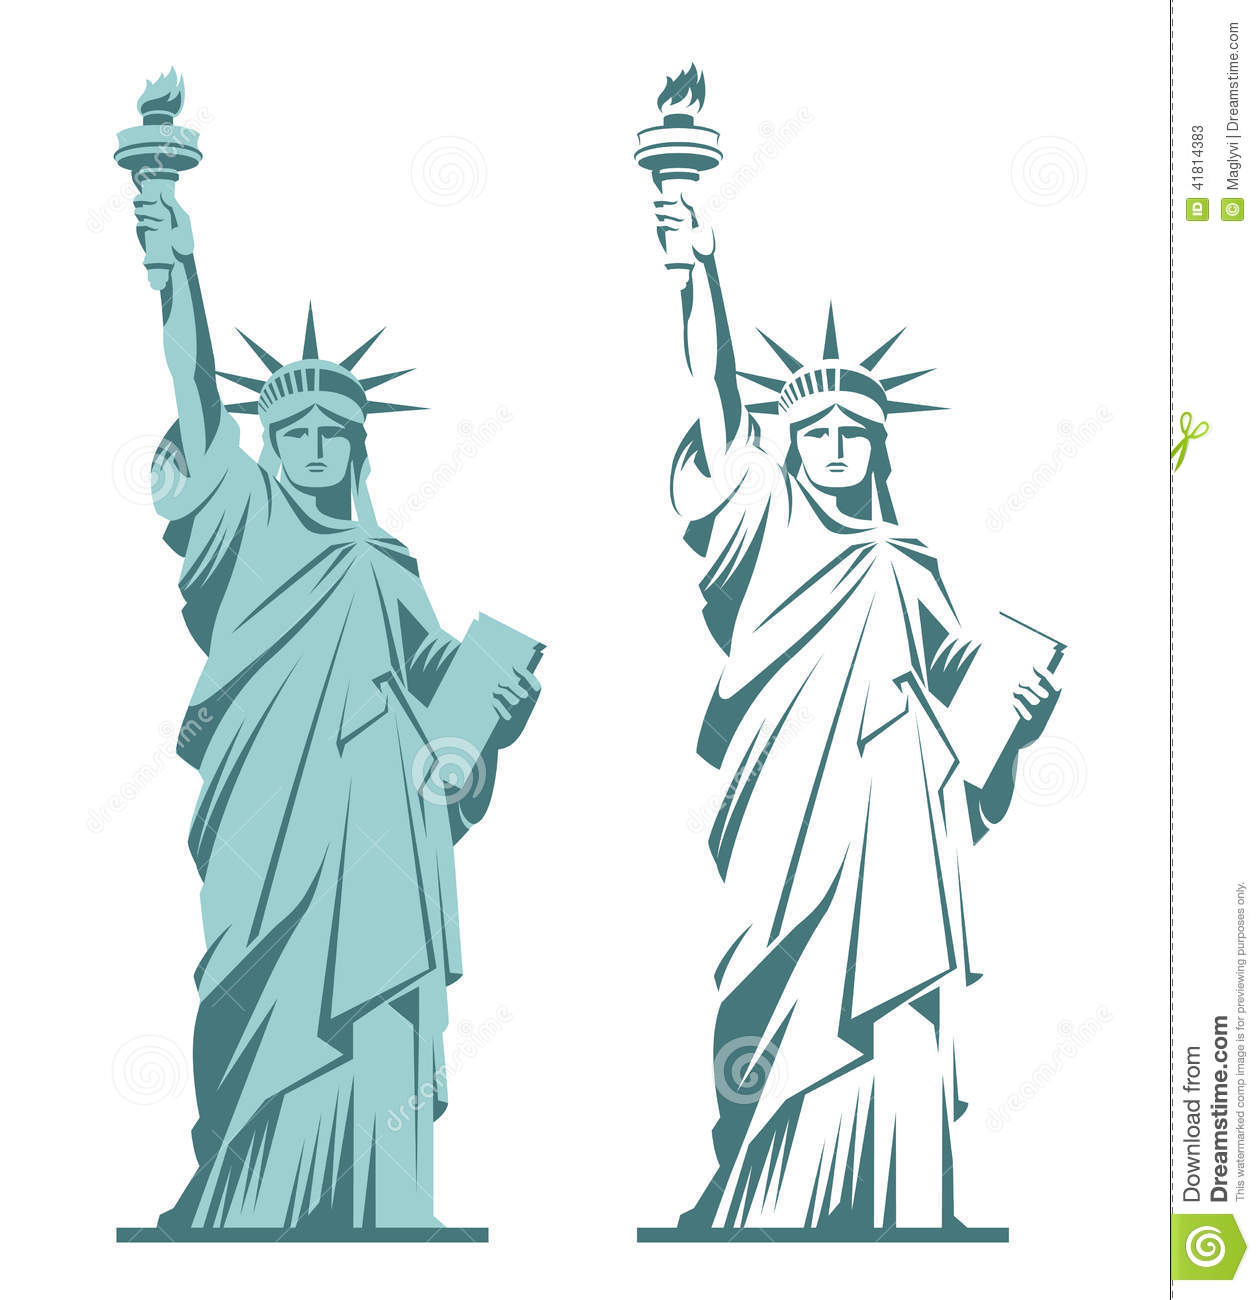 Statue of Liberty Vector Graphic